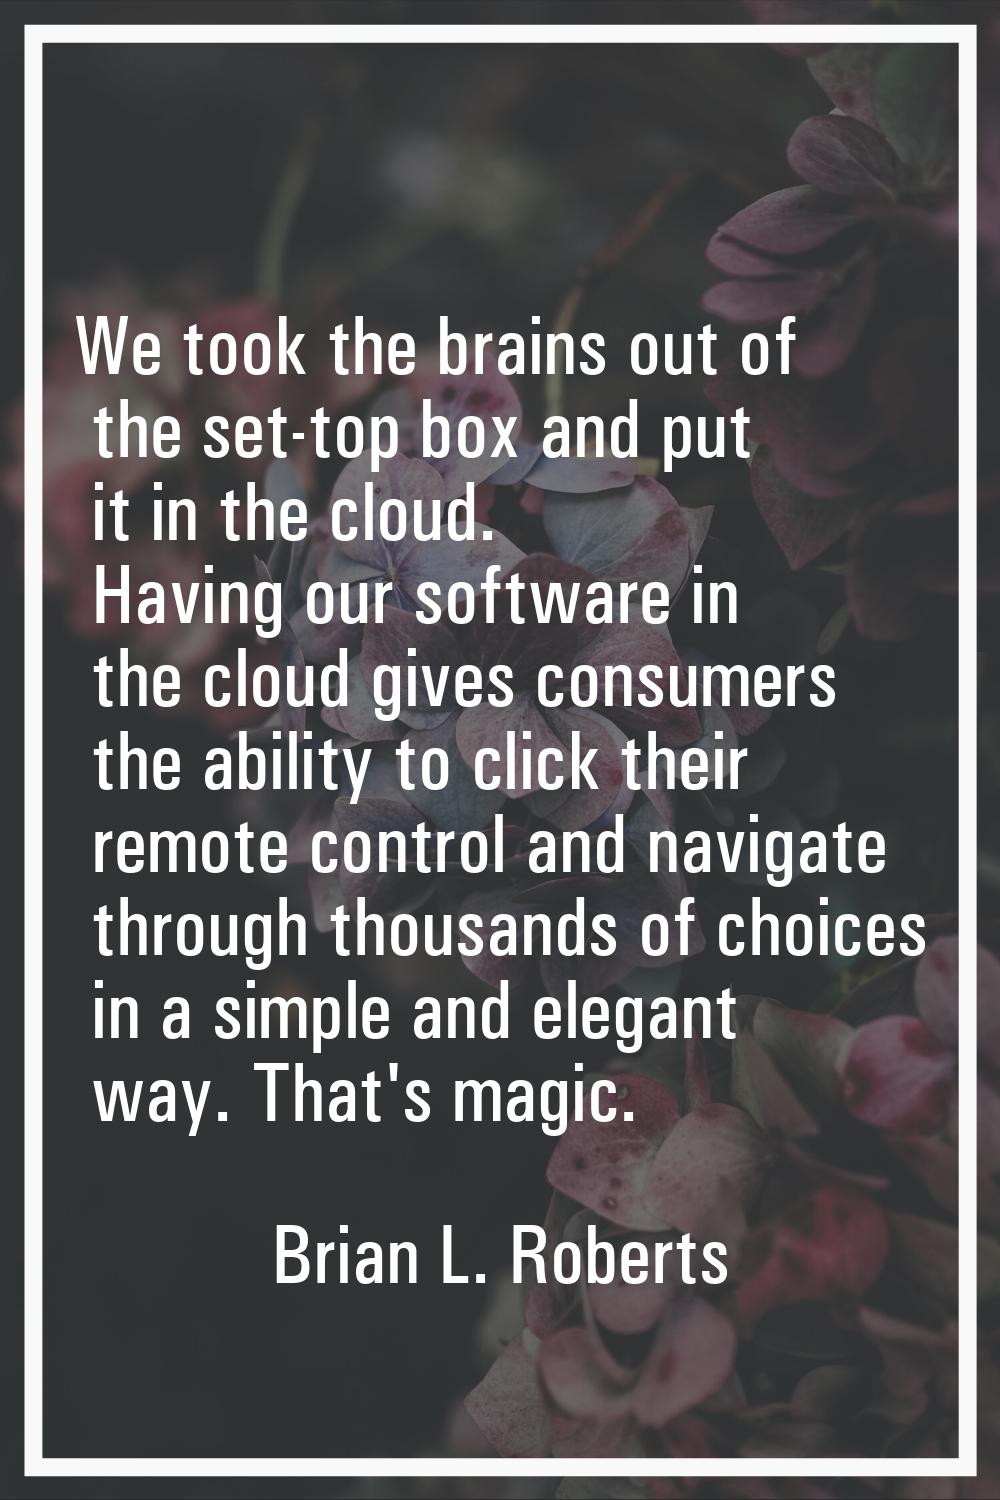 We took the brains out of the set-top box and put it in the cloud. Having our software in the cloud